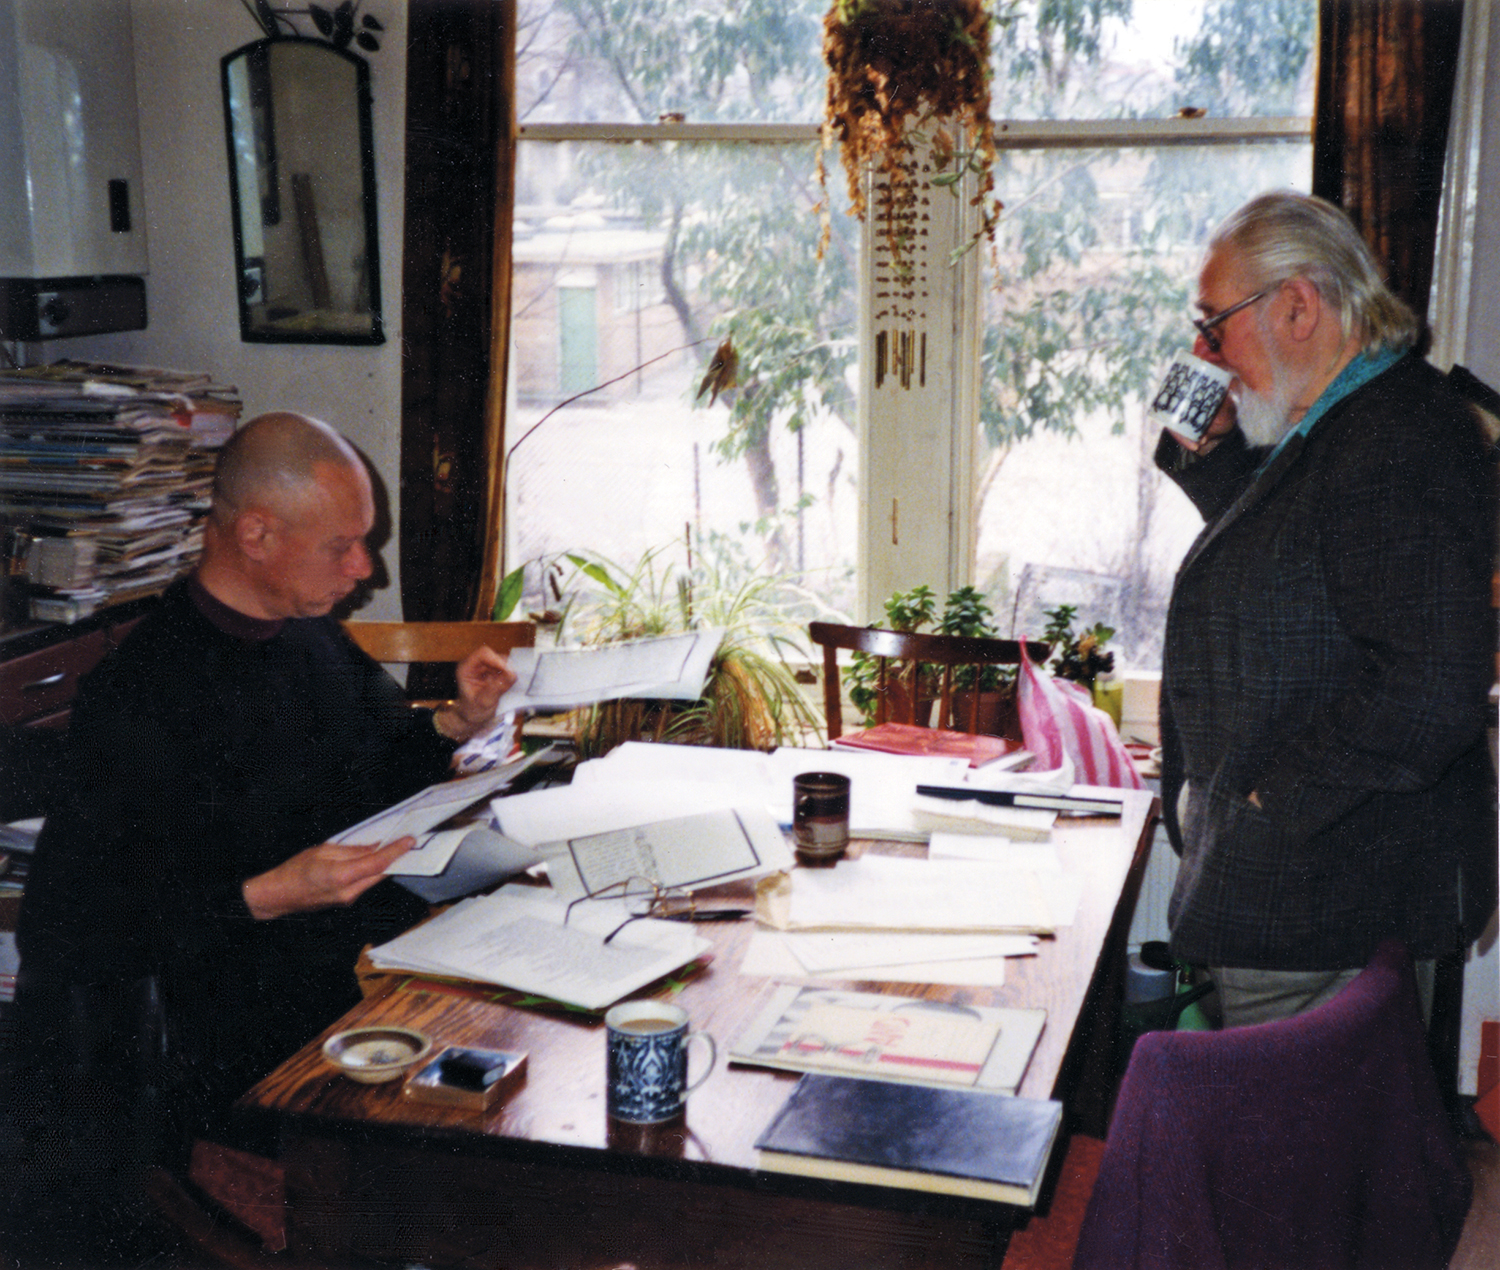 Adrian Clarke and Bob Cobbing in the kitchen of Cobbing and Pike’s home at Petherton Road editing AND 9, 1995. Photographer: Jennifer Pike.